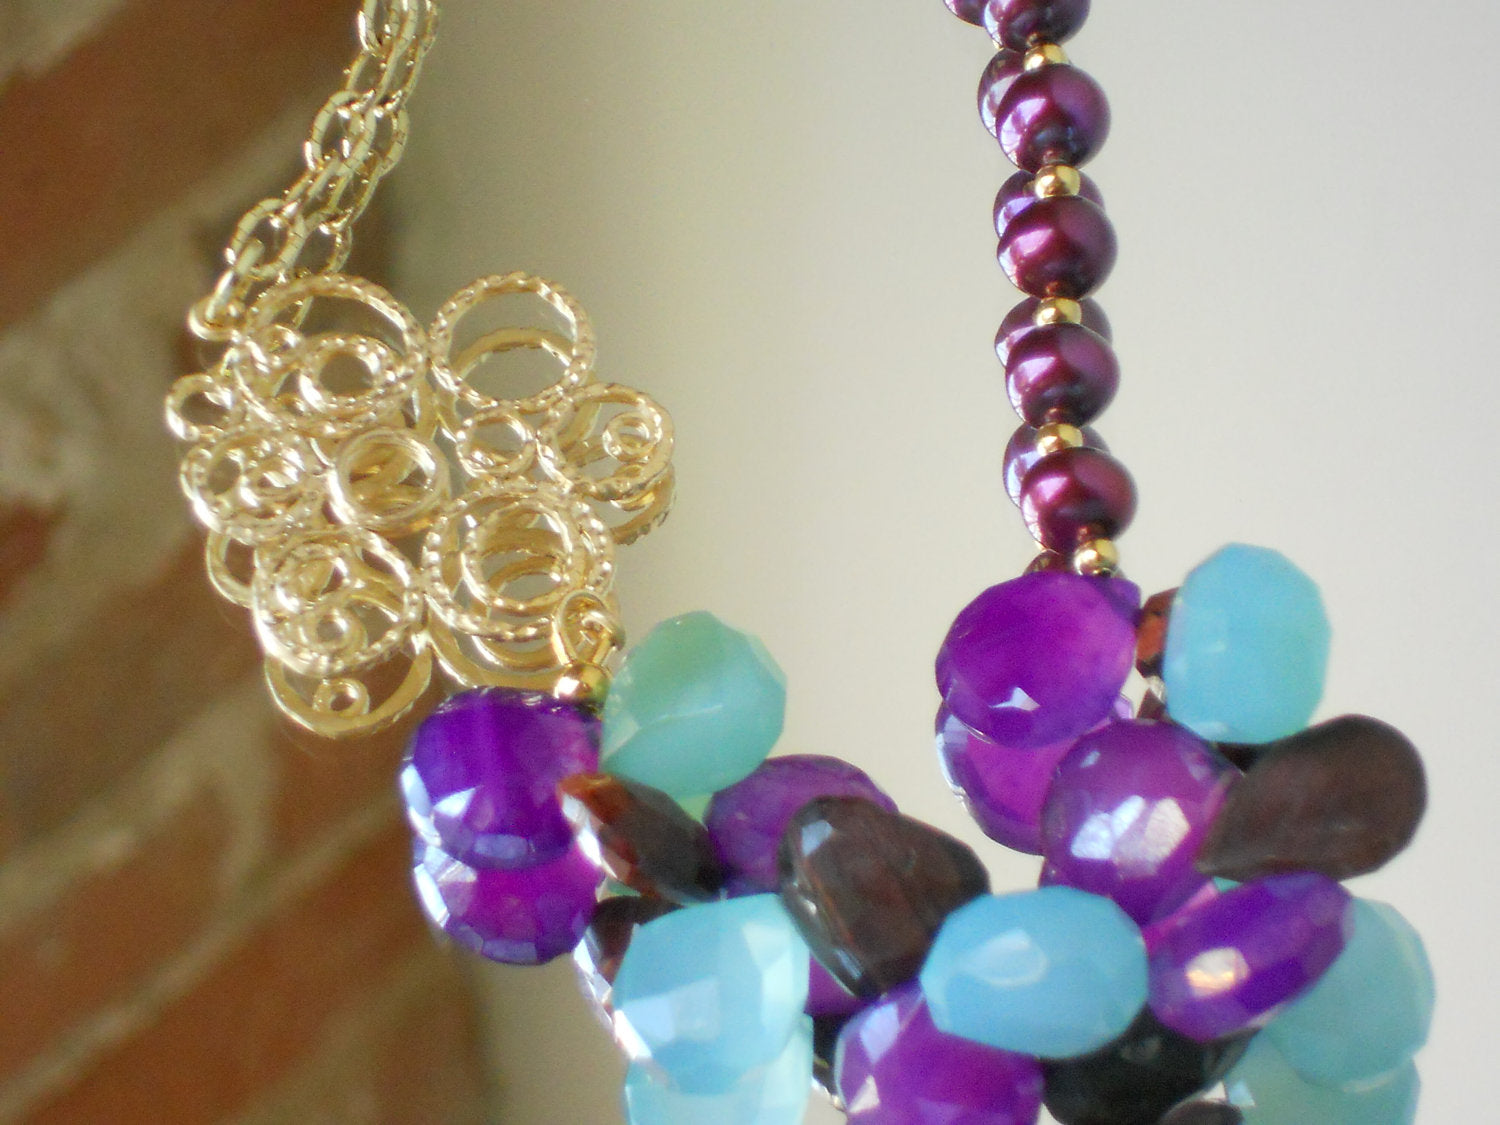 Peruvian Blue Chalcedony and Mystic Amethyst Chalcedony Freshwater Pearl Necklace, Grapes & Grace Dujour